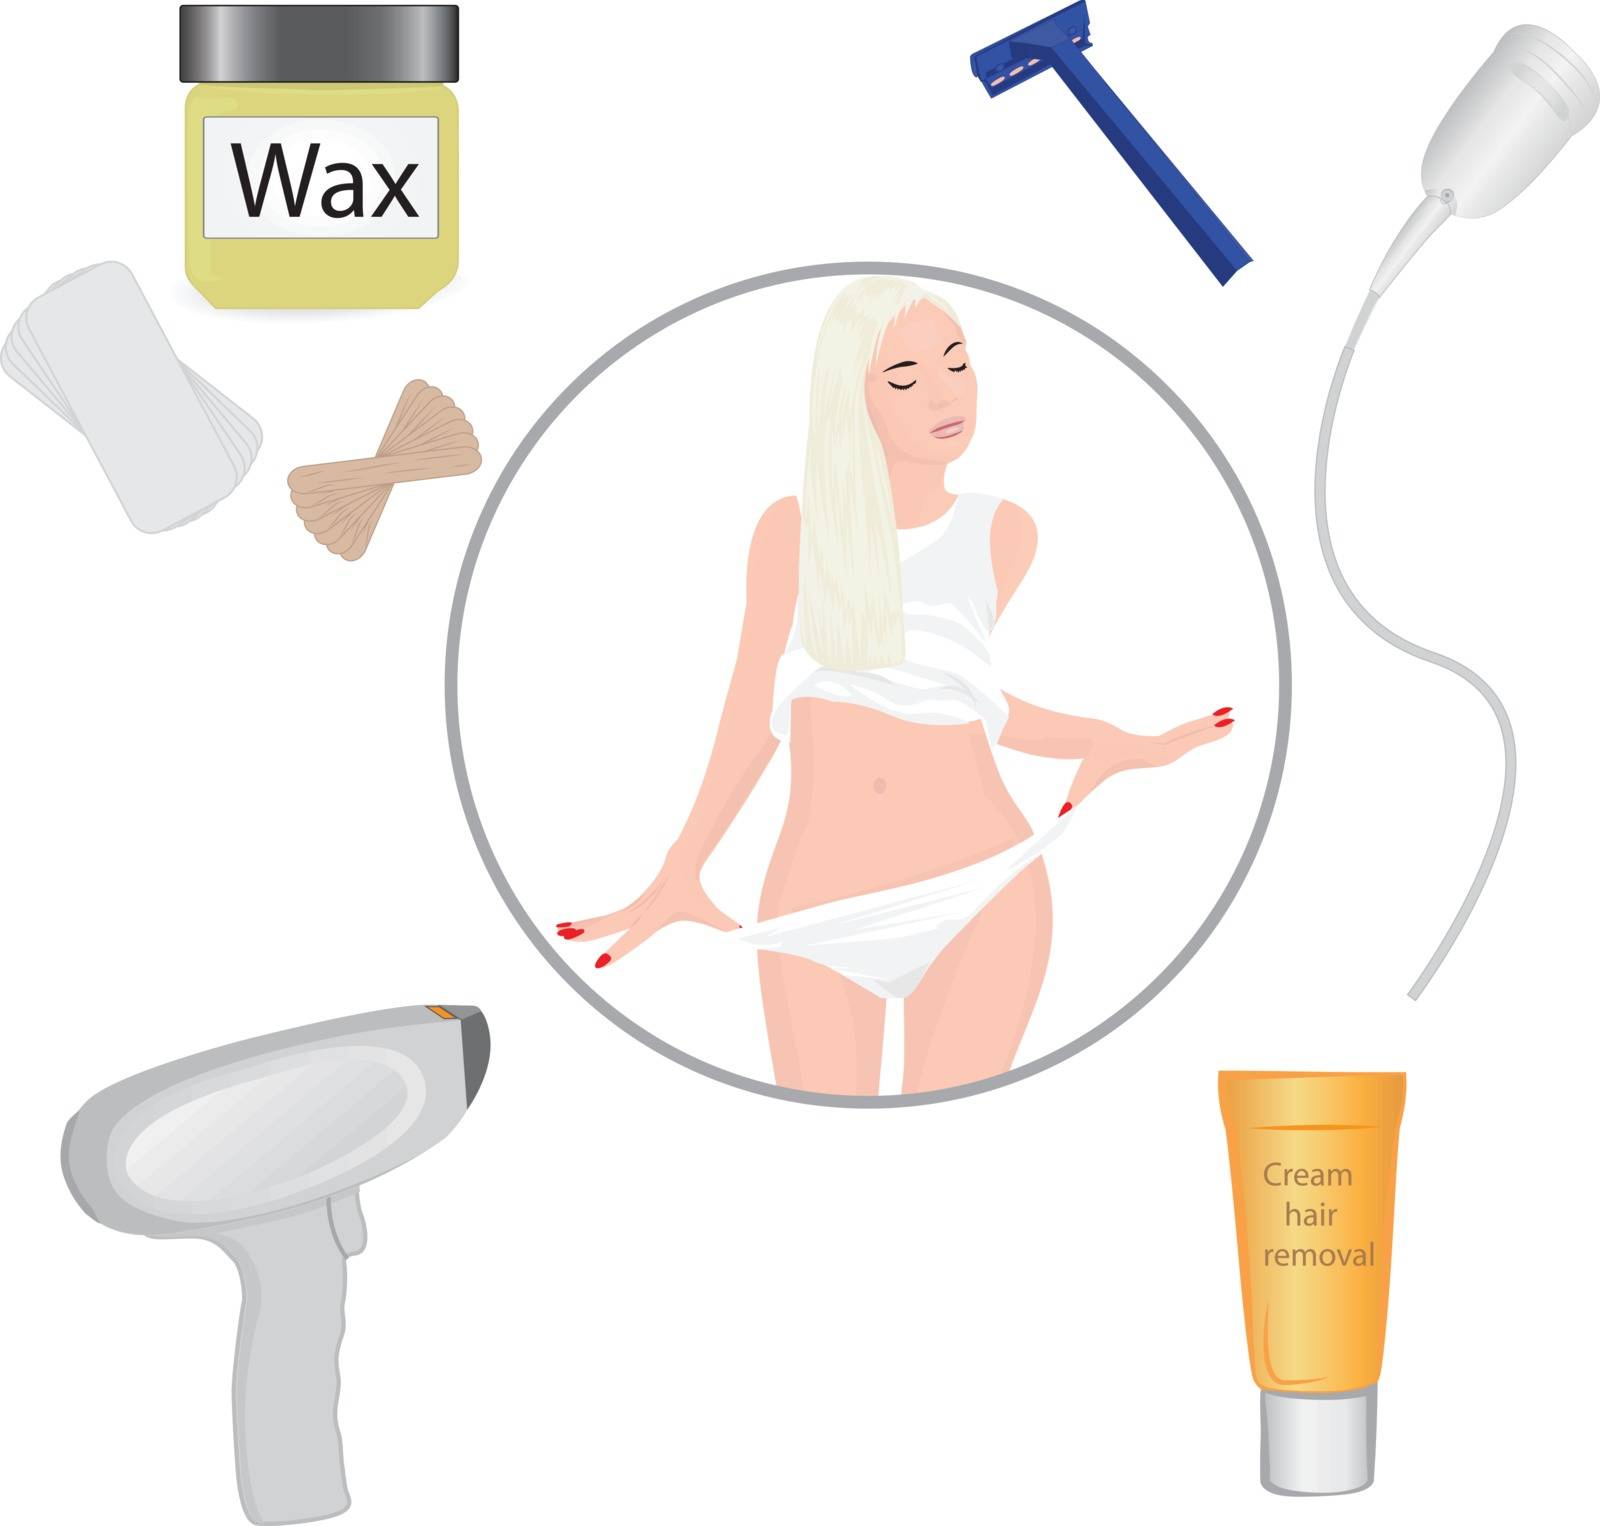 Hair removal methods vector illustration by Olena758